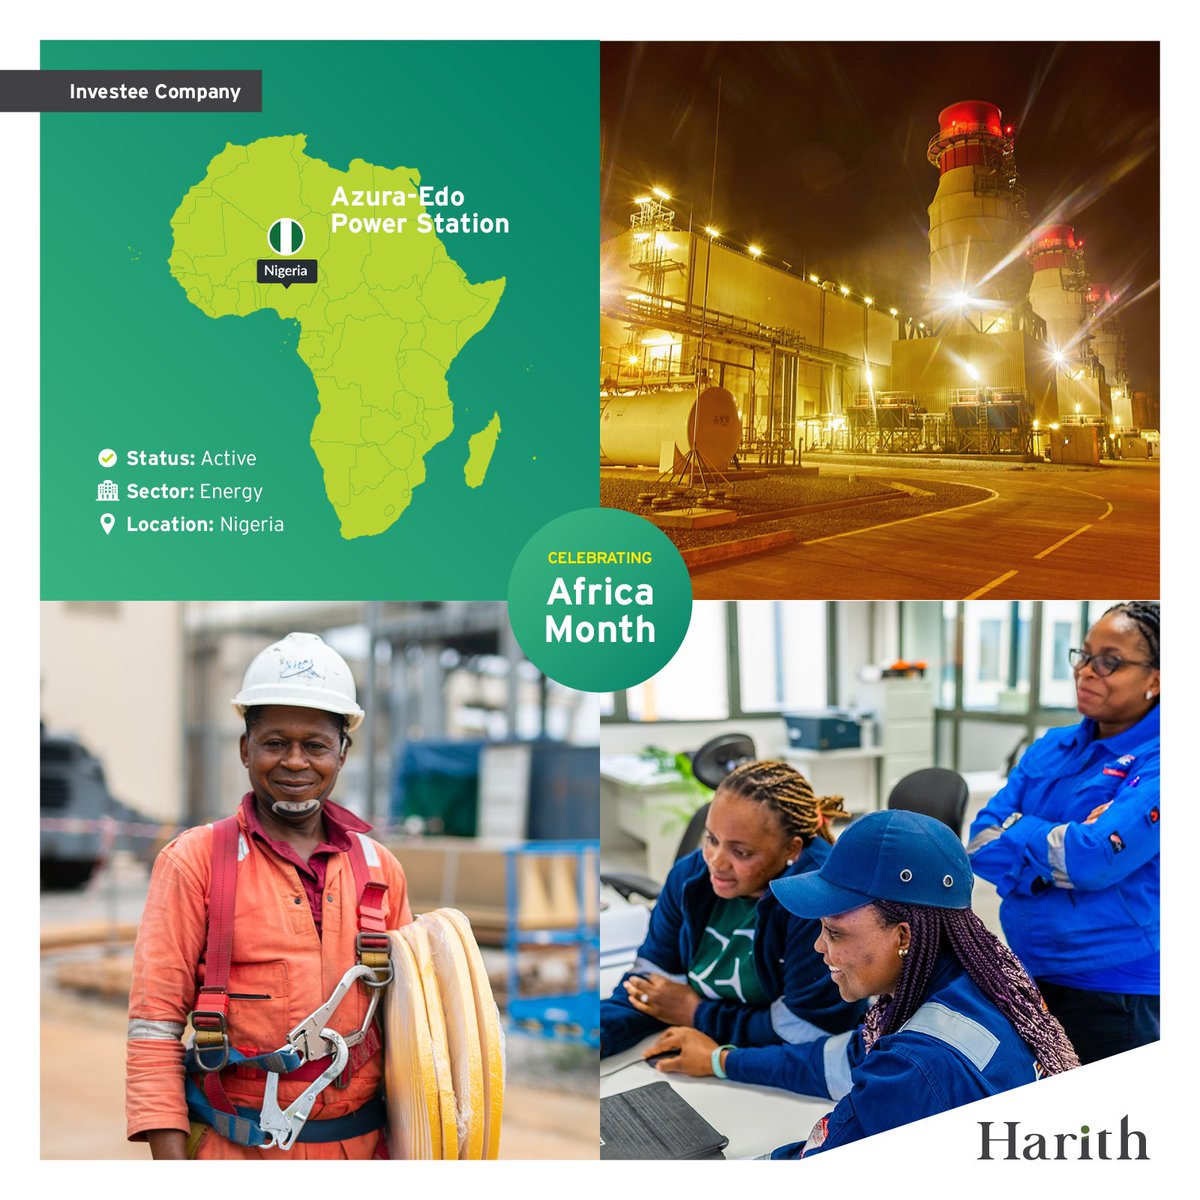 We are proud to invest in African infrastructure, including Nigeria! The Azura-Edo IPP in Benin City showcases our dedication to sustainable energy solutions. Generating 461MW, it's among Nigeria's top power contributors, supplying 8% of the national grid. #AfricaMonth #Nigeria